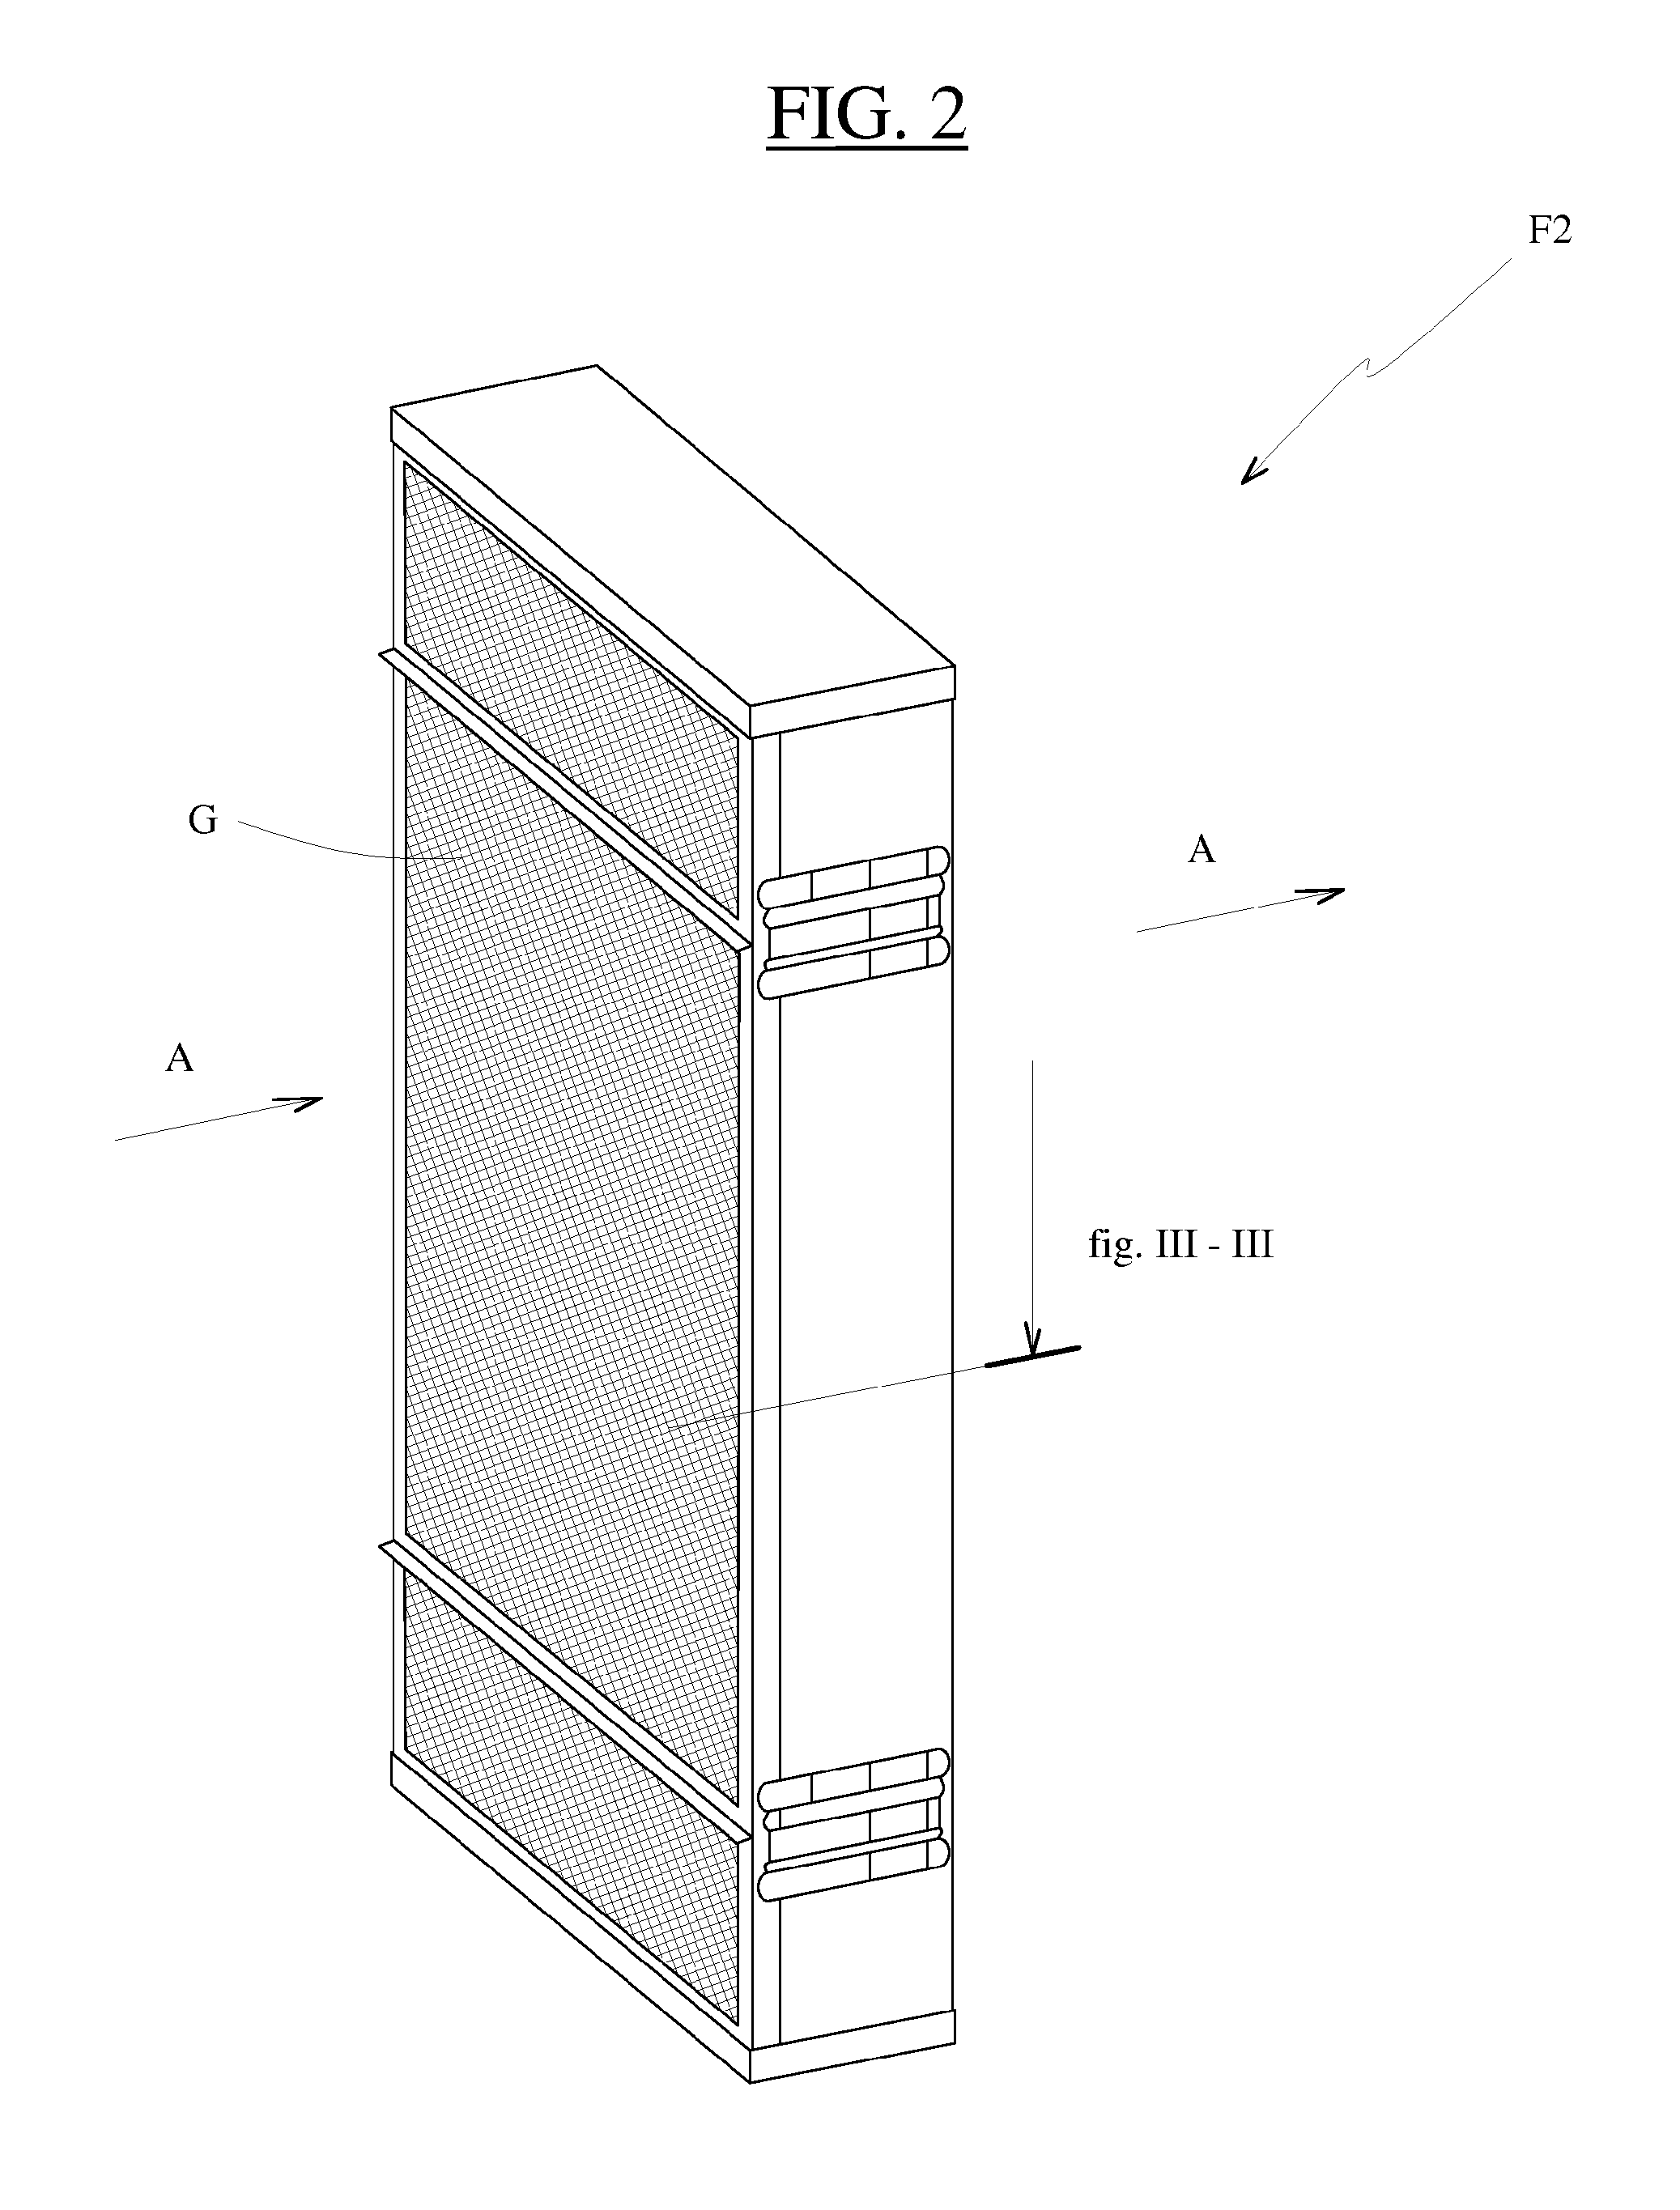 Microbicidal filter and filtration cartridge incorporating such a filter